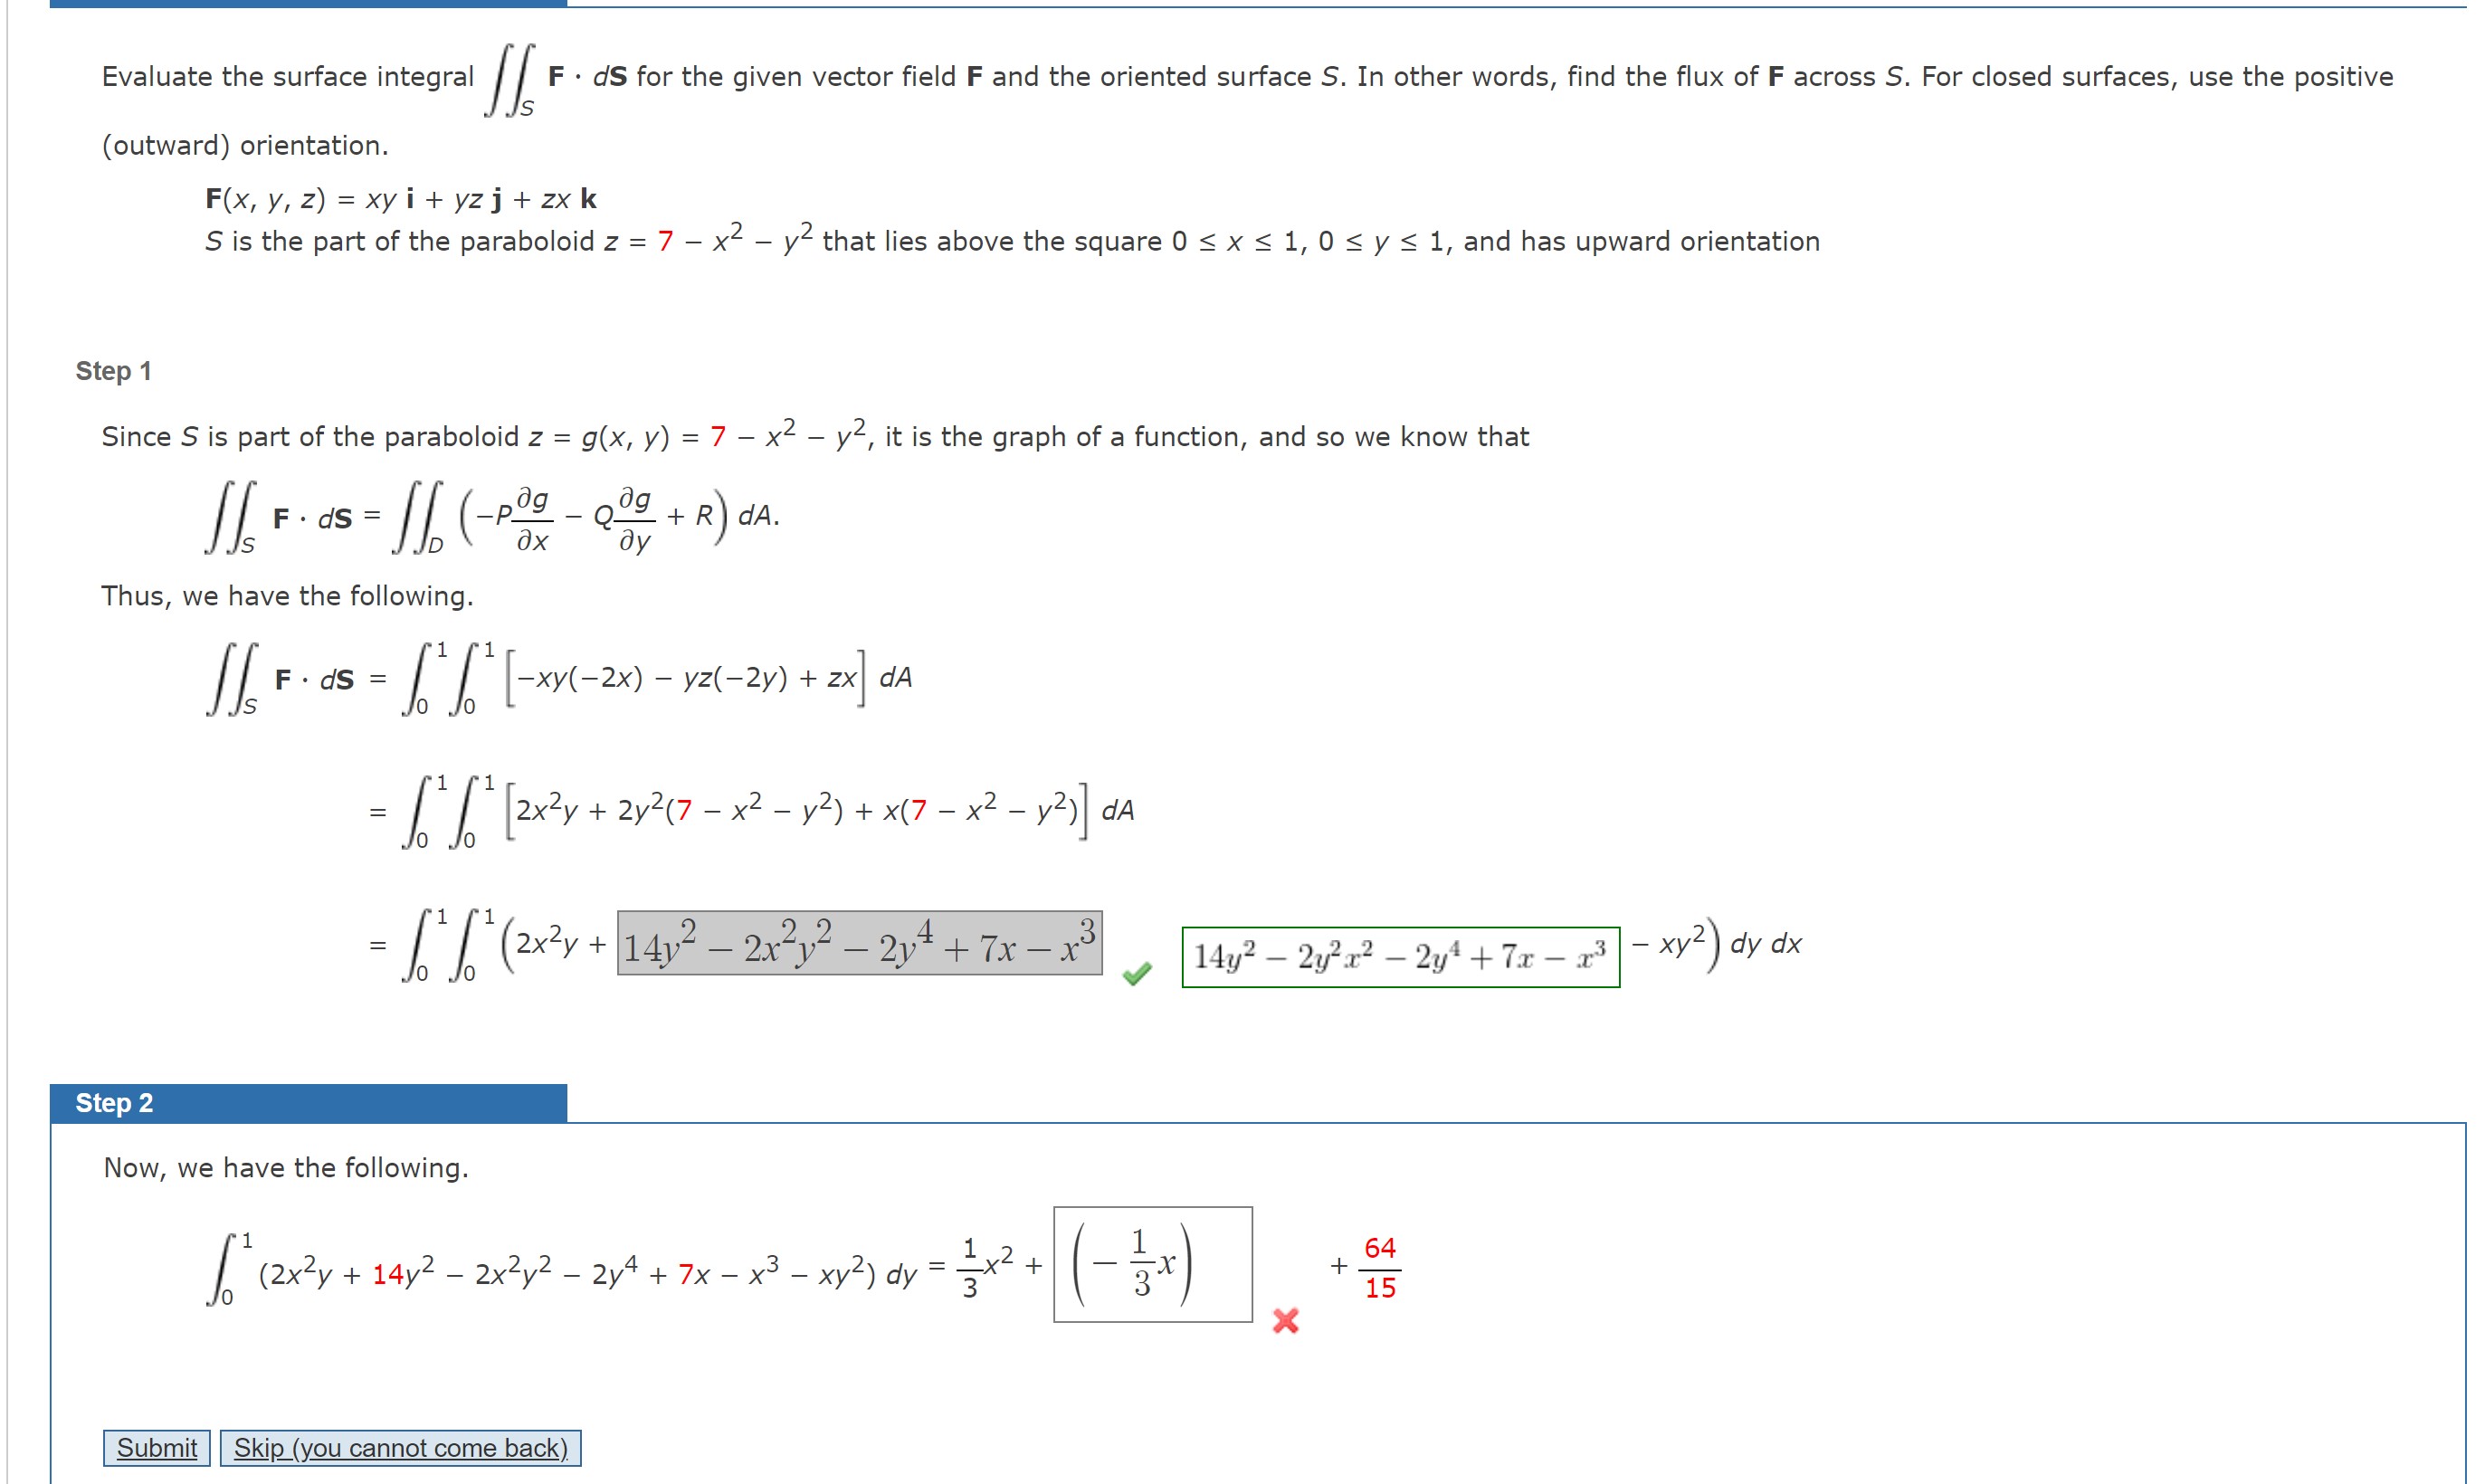 Solved Evaluate the surface integral ∬SF⋅dS for the given 